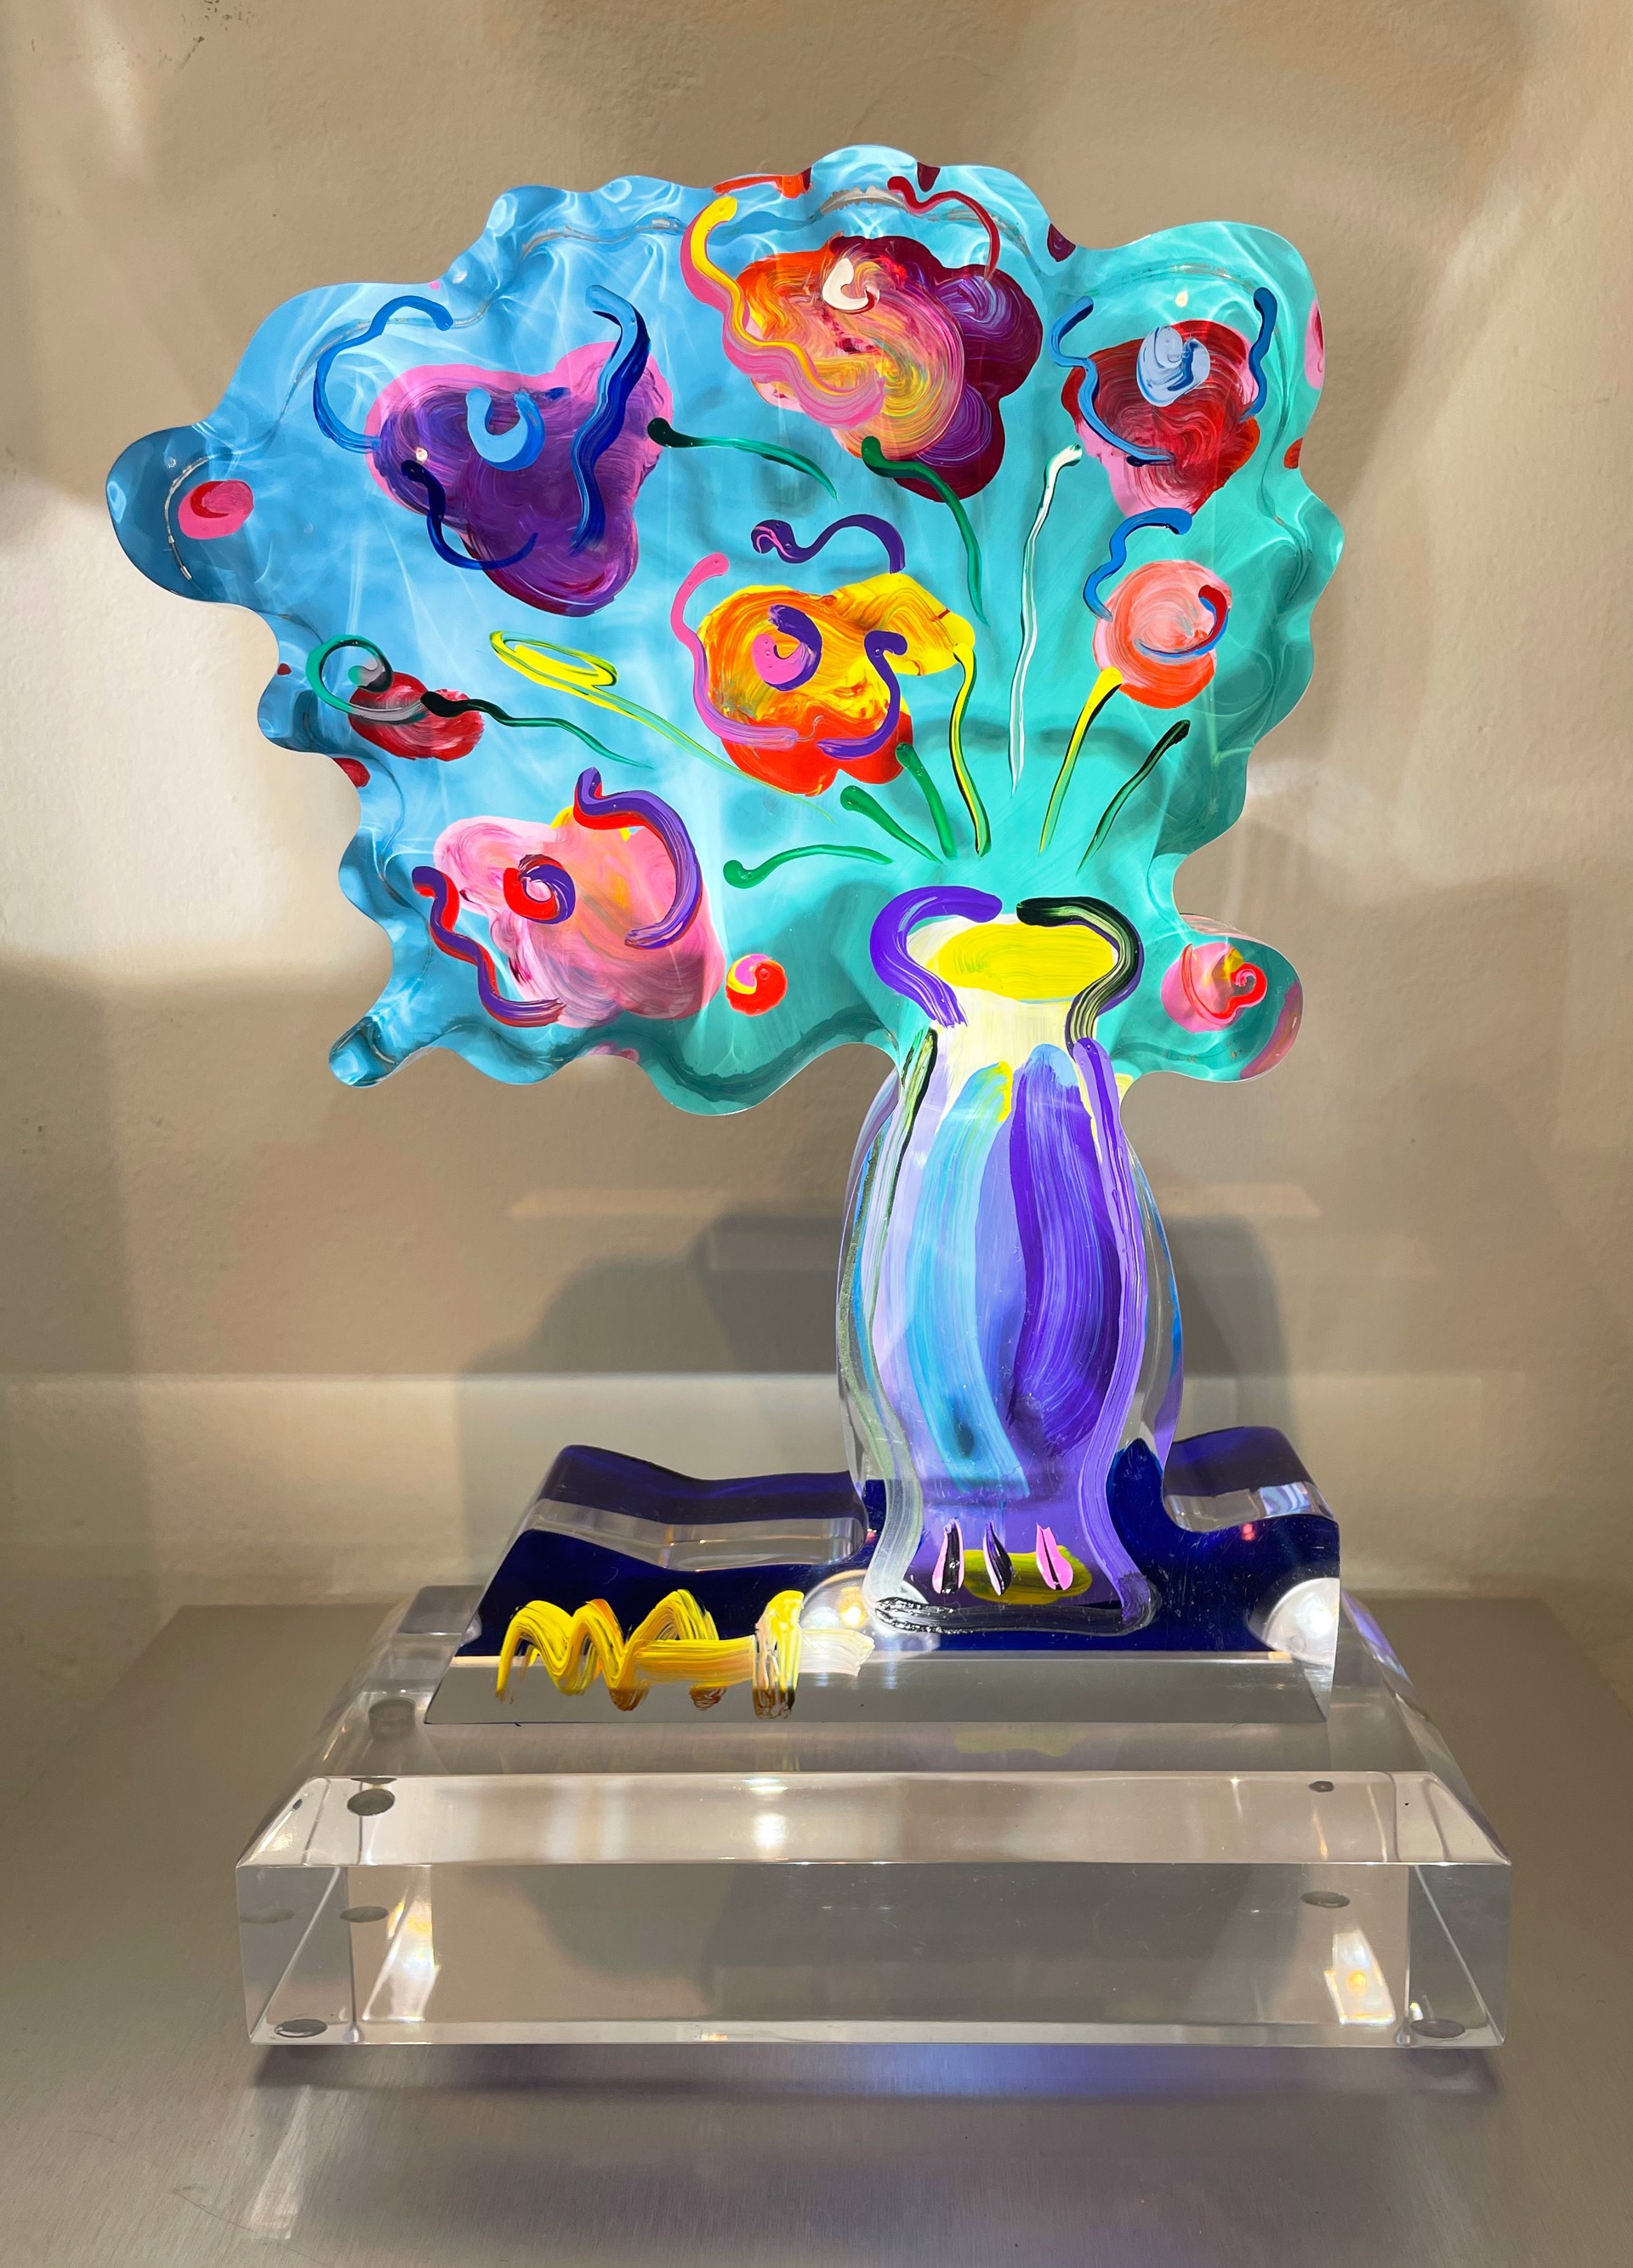 Vase of Flowers (Blue) by Peter Max